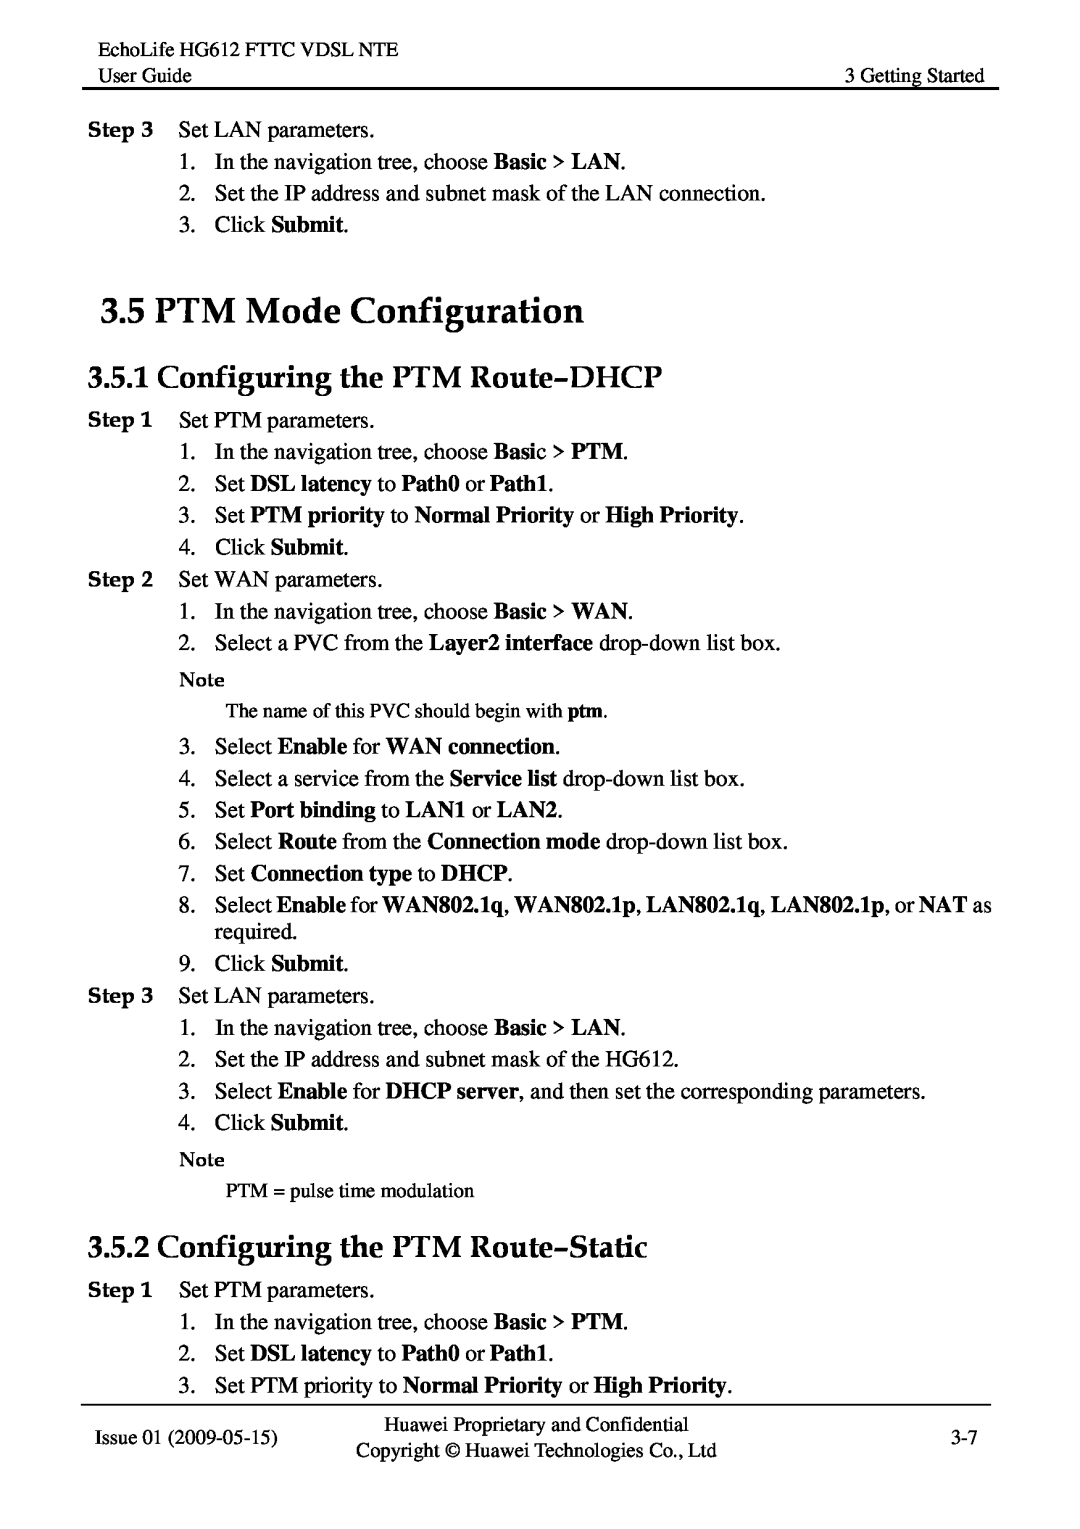 Huawei HG612FTTC VDSL NTE manual PTM Mode Configuration, Configuring the PTM Route-DHCP, Configuring the PTM Route-Static 